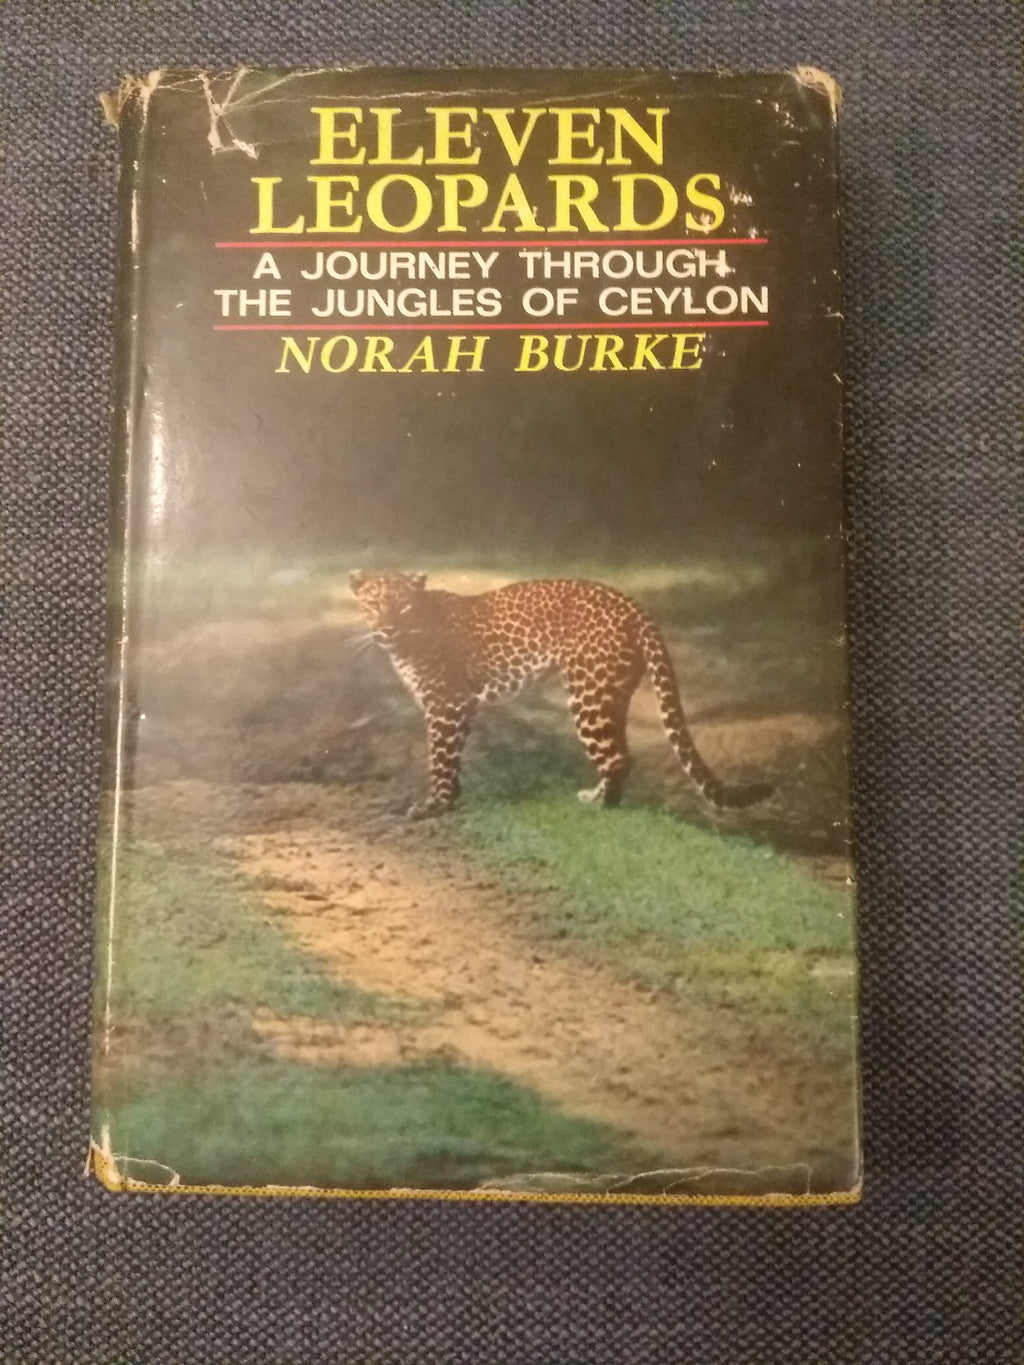 Eleven Leopards: A Journey Through The Jungles of Ceylon, by Norah Burke